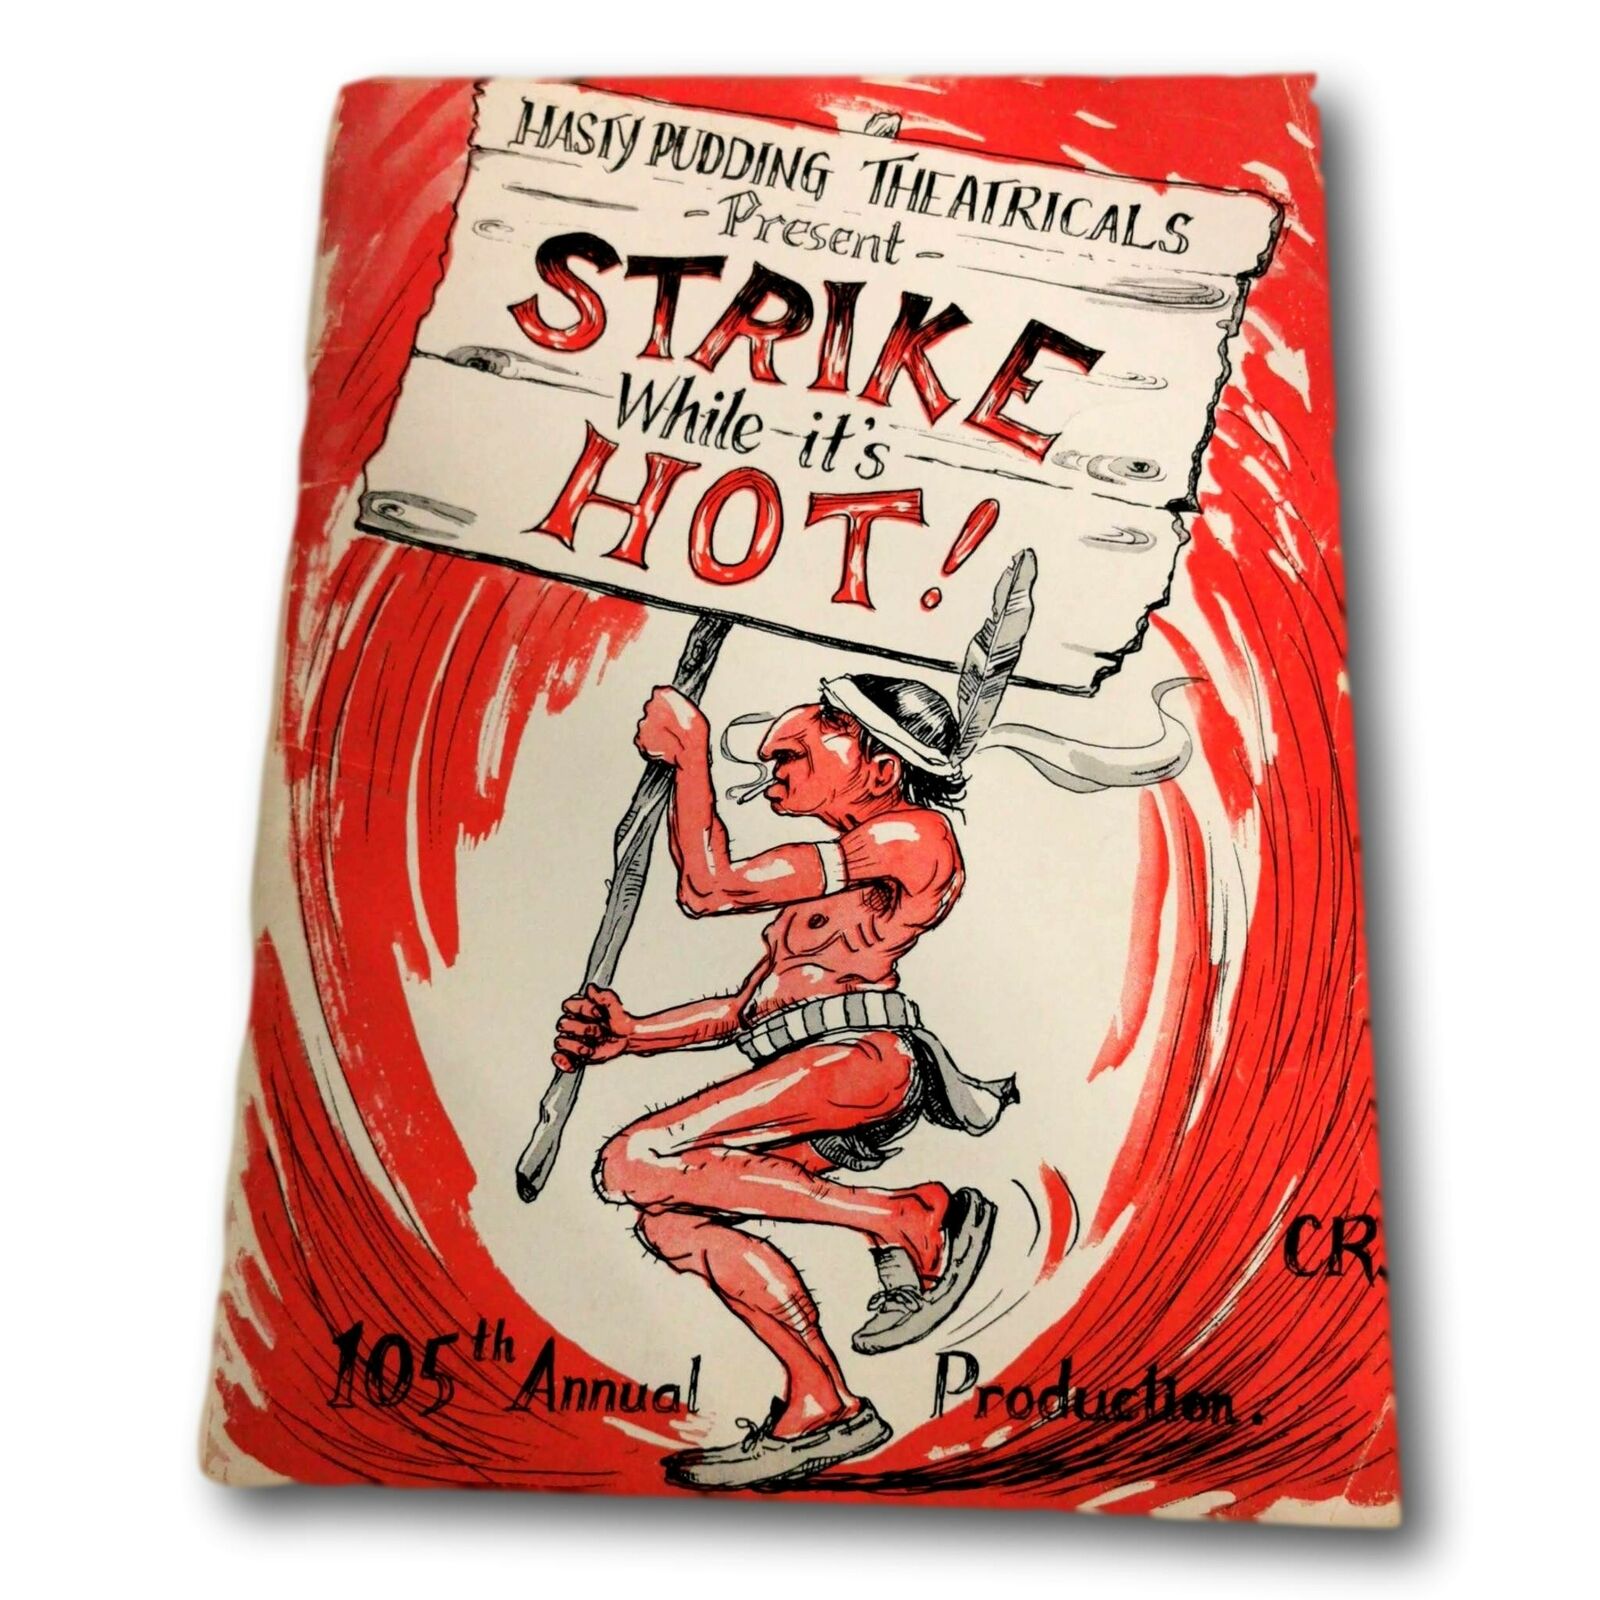 Hasty Pudding Harvard 1953 Strike While Its Hot Souvenir Program 105th Theater